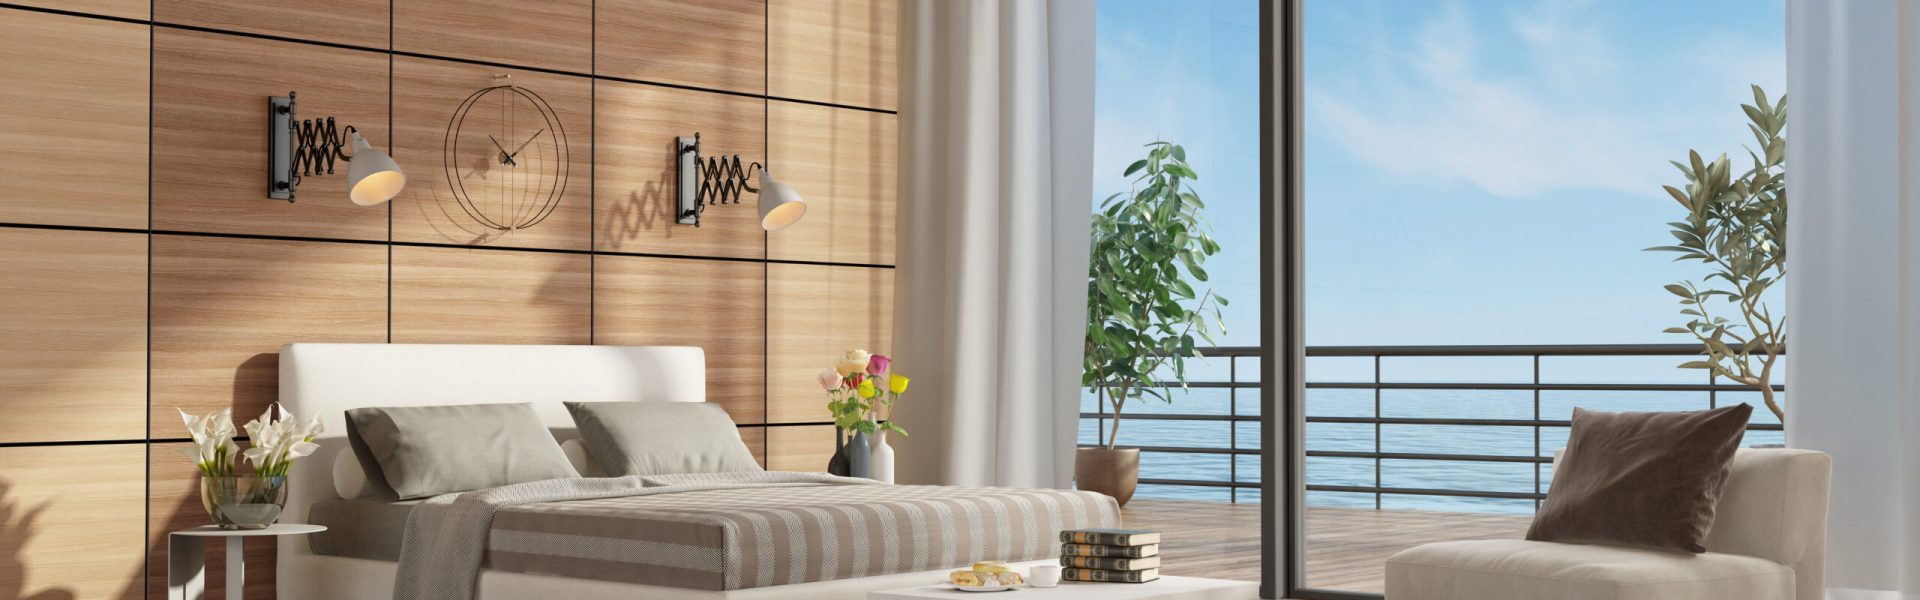 Mastre bedroom with terrace overlooking the sea and double bed against wooden paneling - 3d rendering